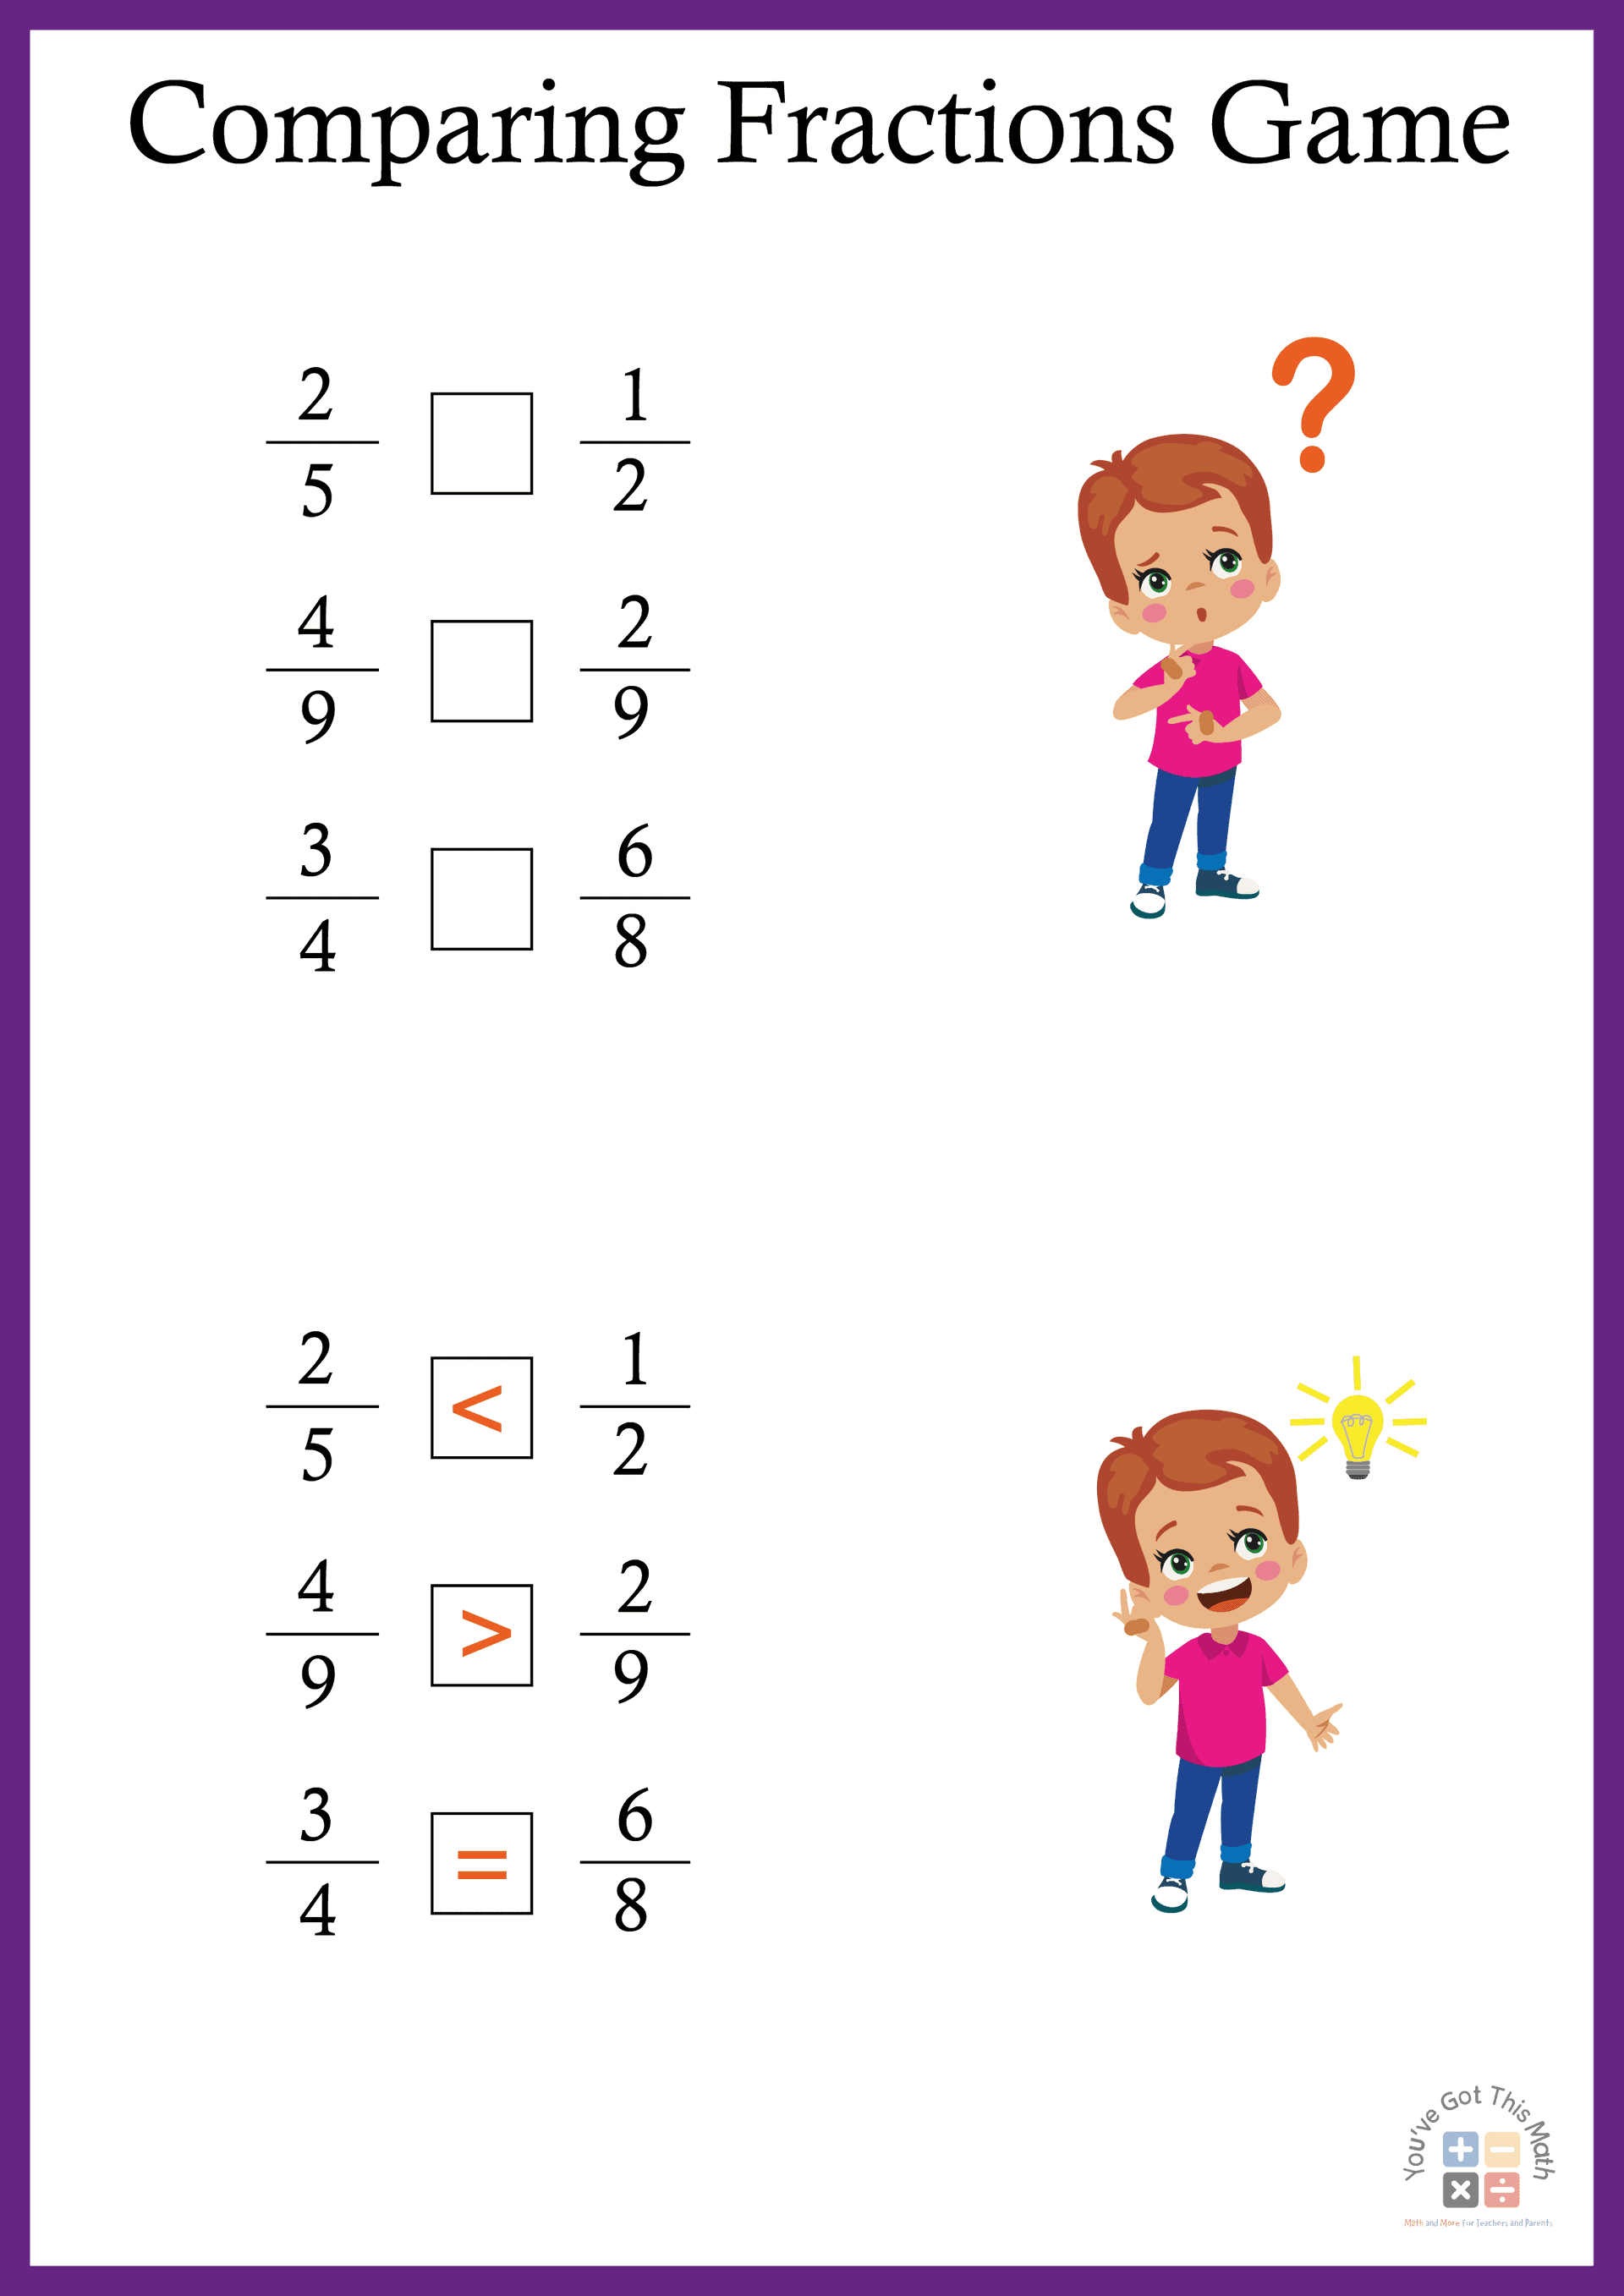 Fun Comparing Fractions Game | 25+ Free Worksheet Pages